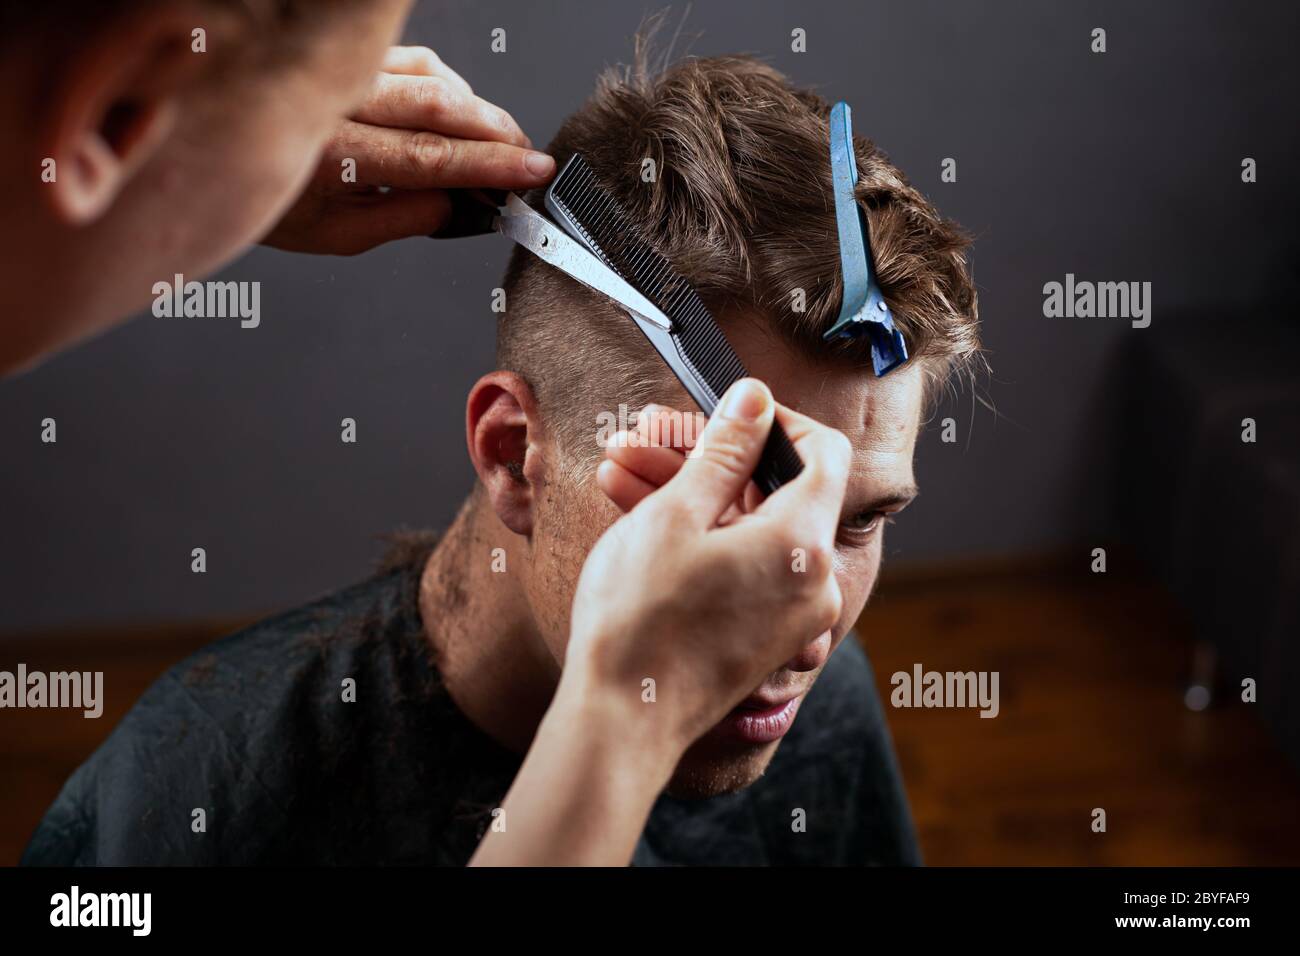 fashion haircut, young guy cuts hair at the hairdresser. barbershop. Stock Photo